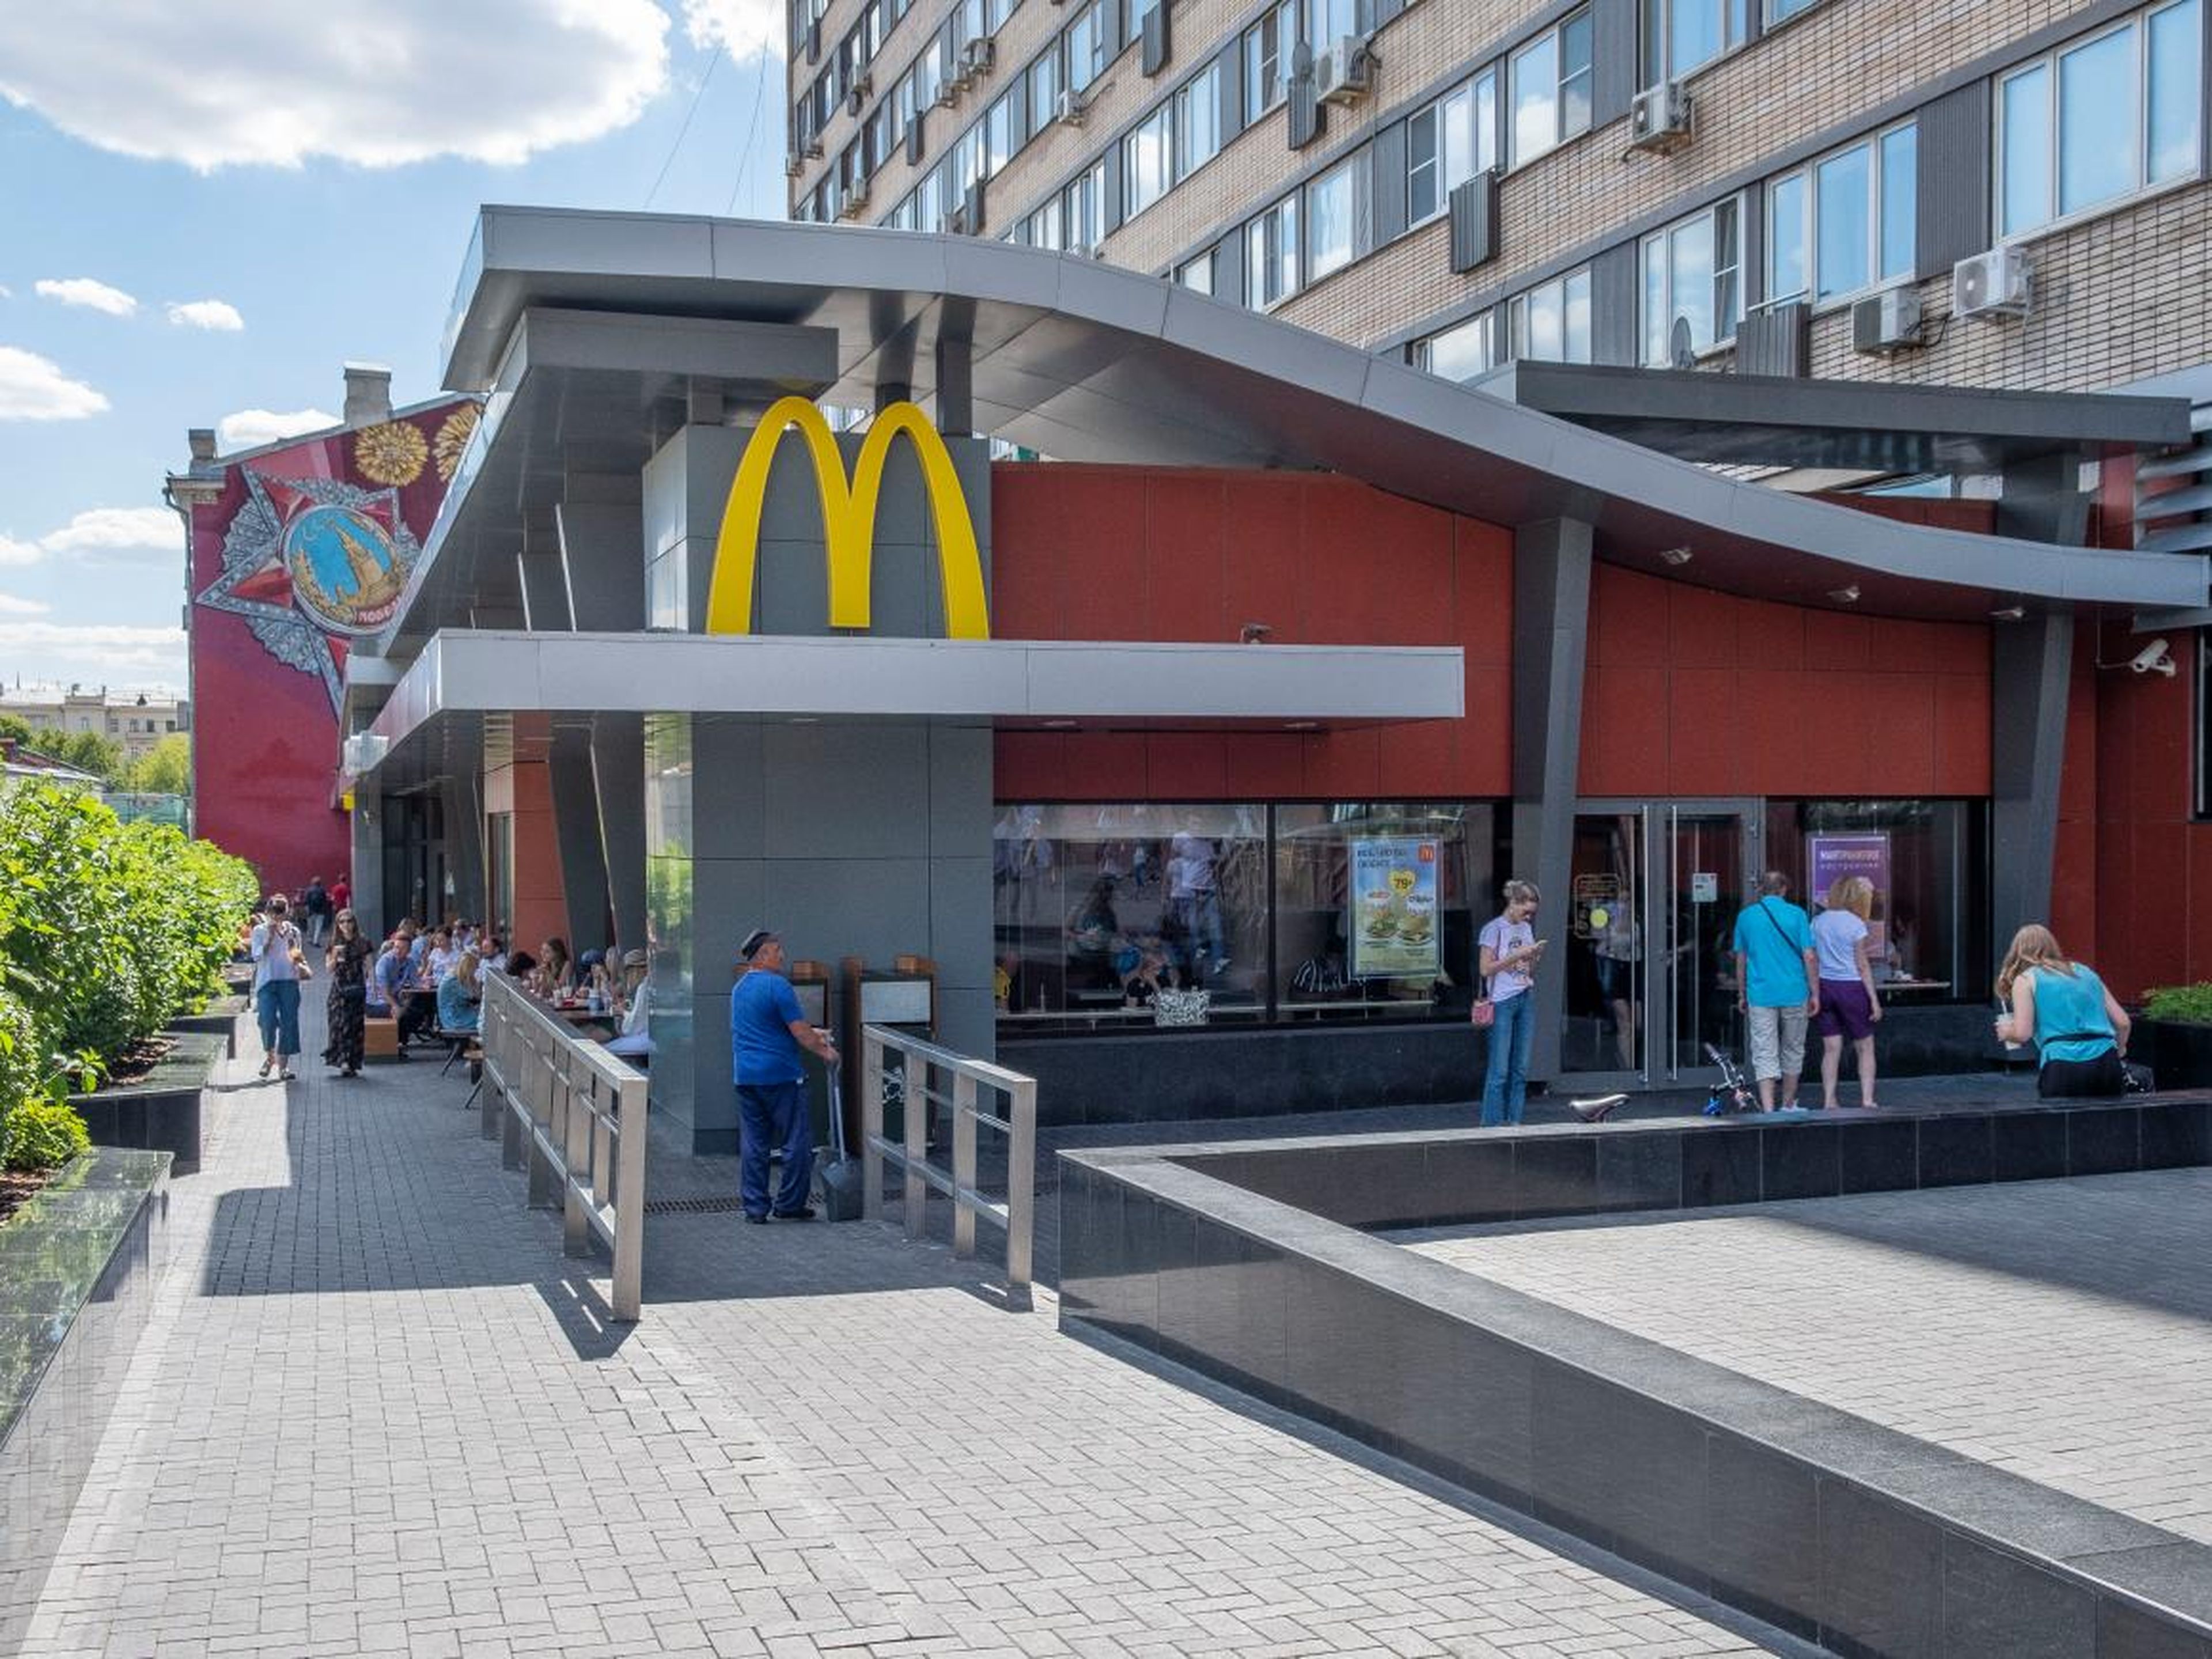 On a recent trip to Russia, I ate lunch at the country's first McDonald's, which is in Moscow, to see how it stacks up against its counterparts in the US.